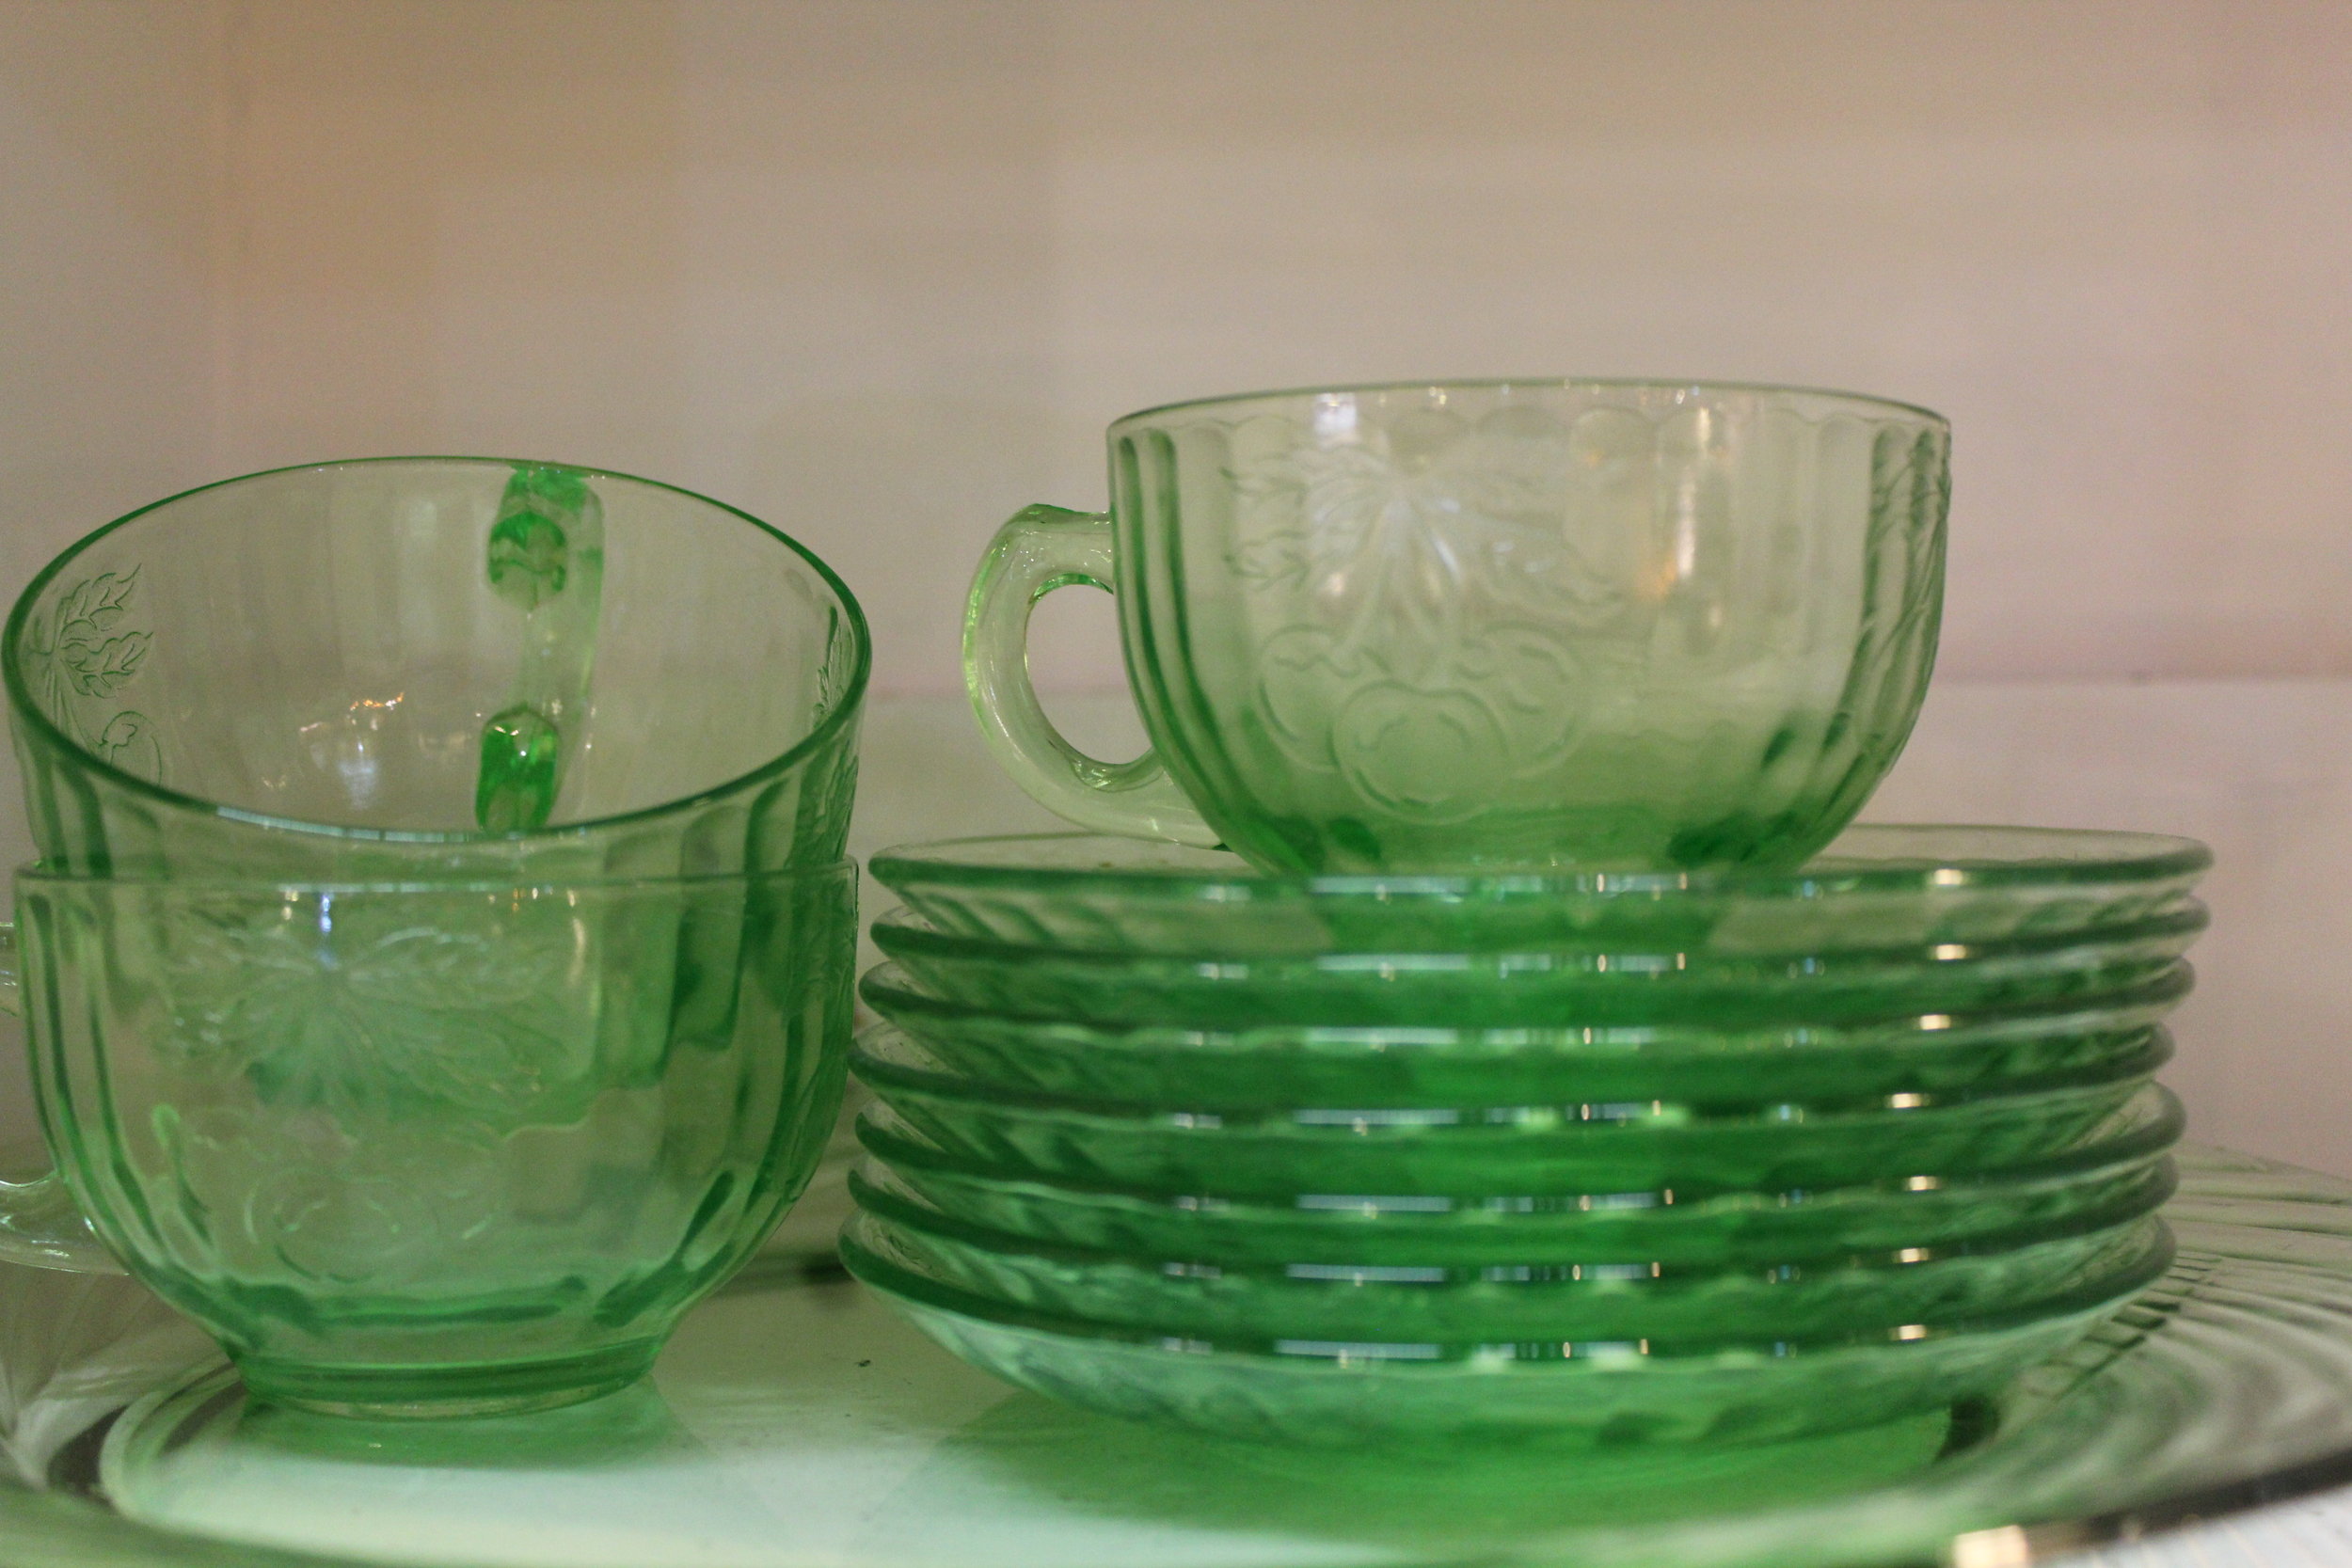 Green depression glass plates and cups